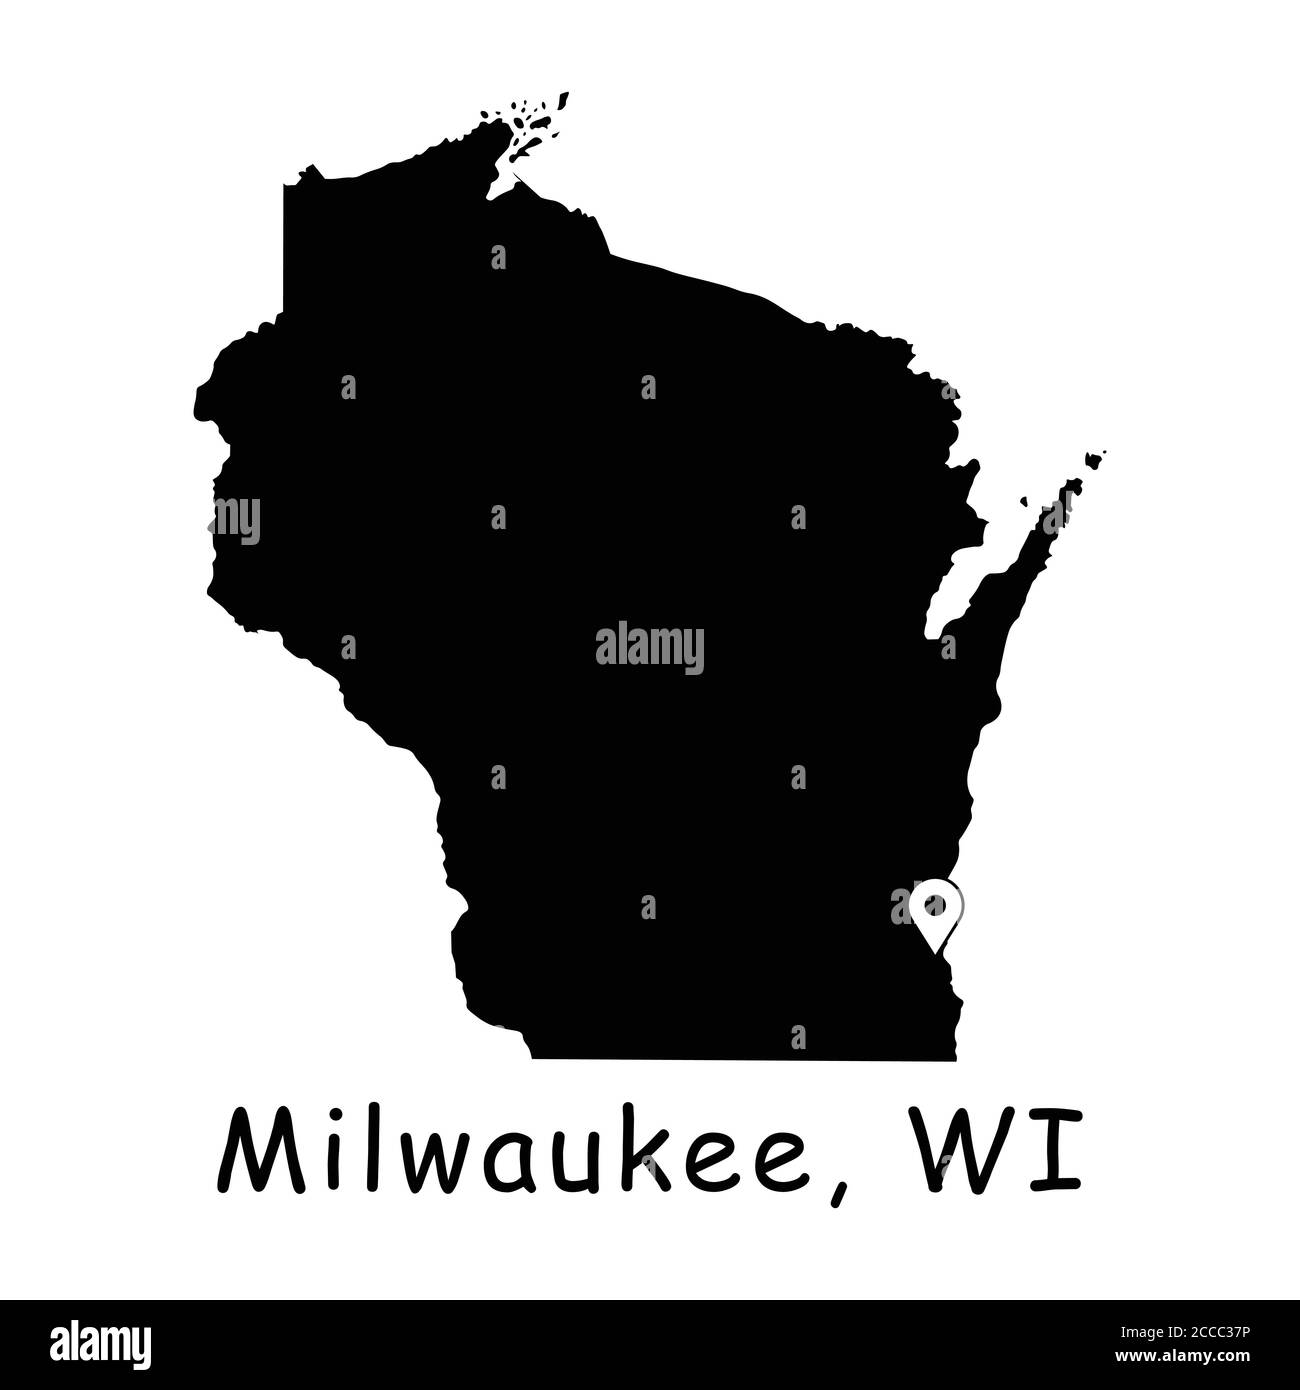 Milwaukee on Wisconsin State Map. Detailed WI State Map with Location Pin on Milwaukee City. Black silhouette vector map isolated on white background. Stock Vector